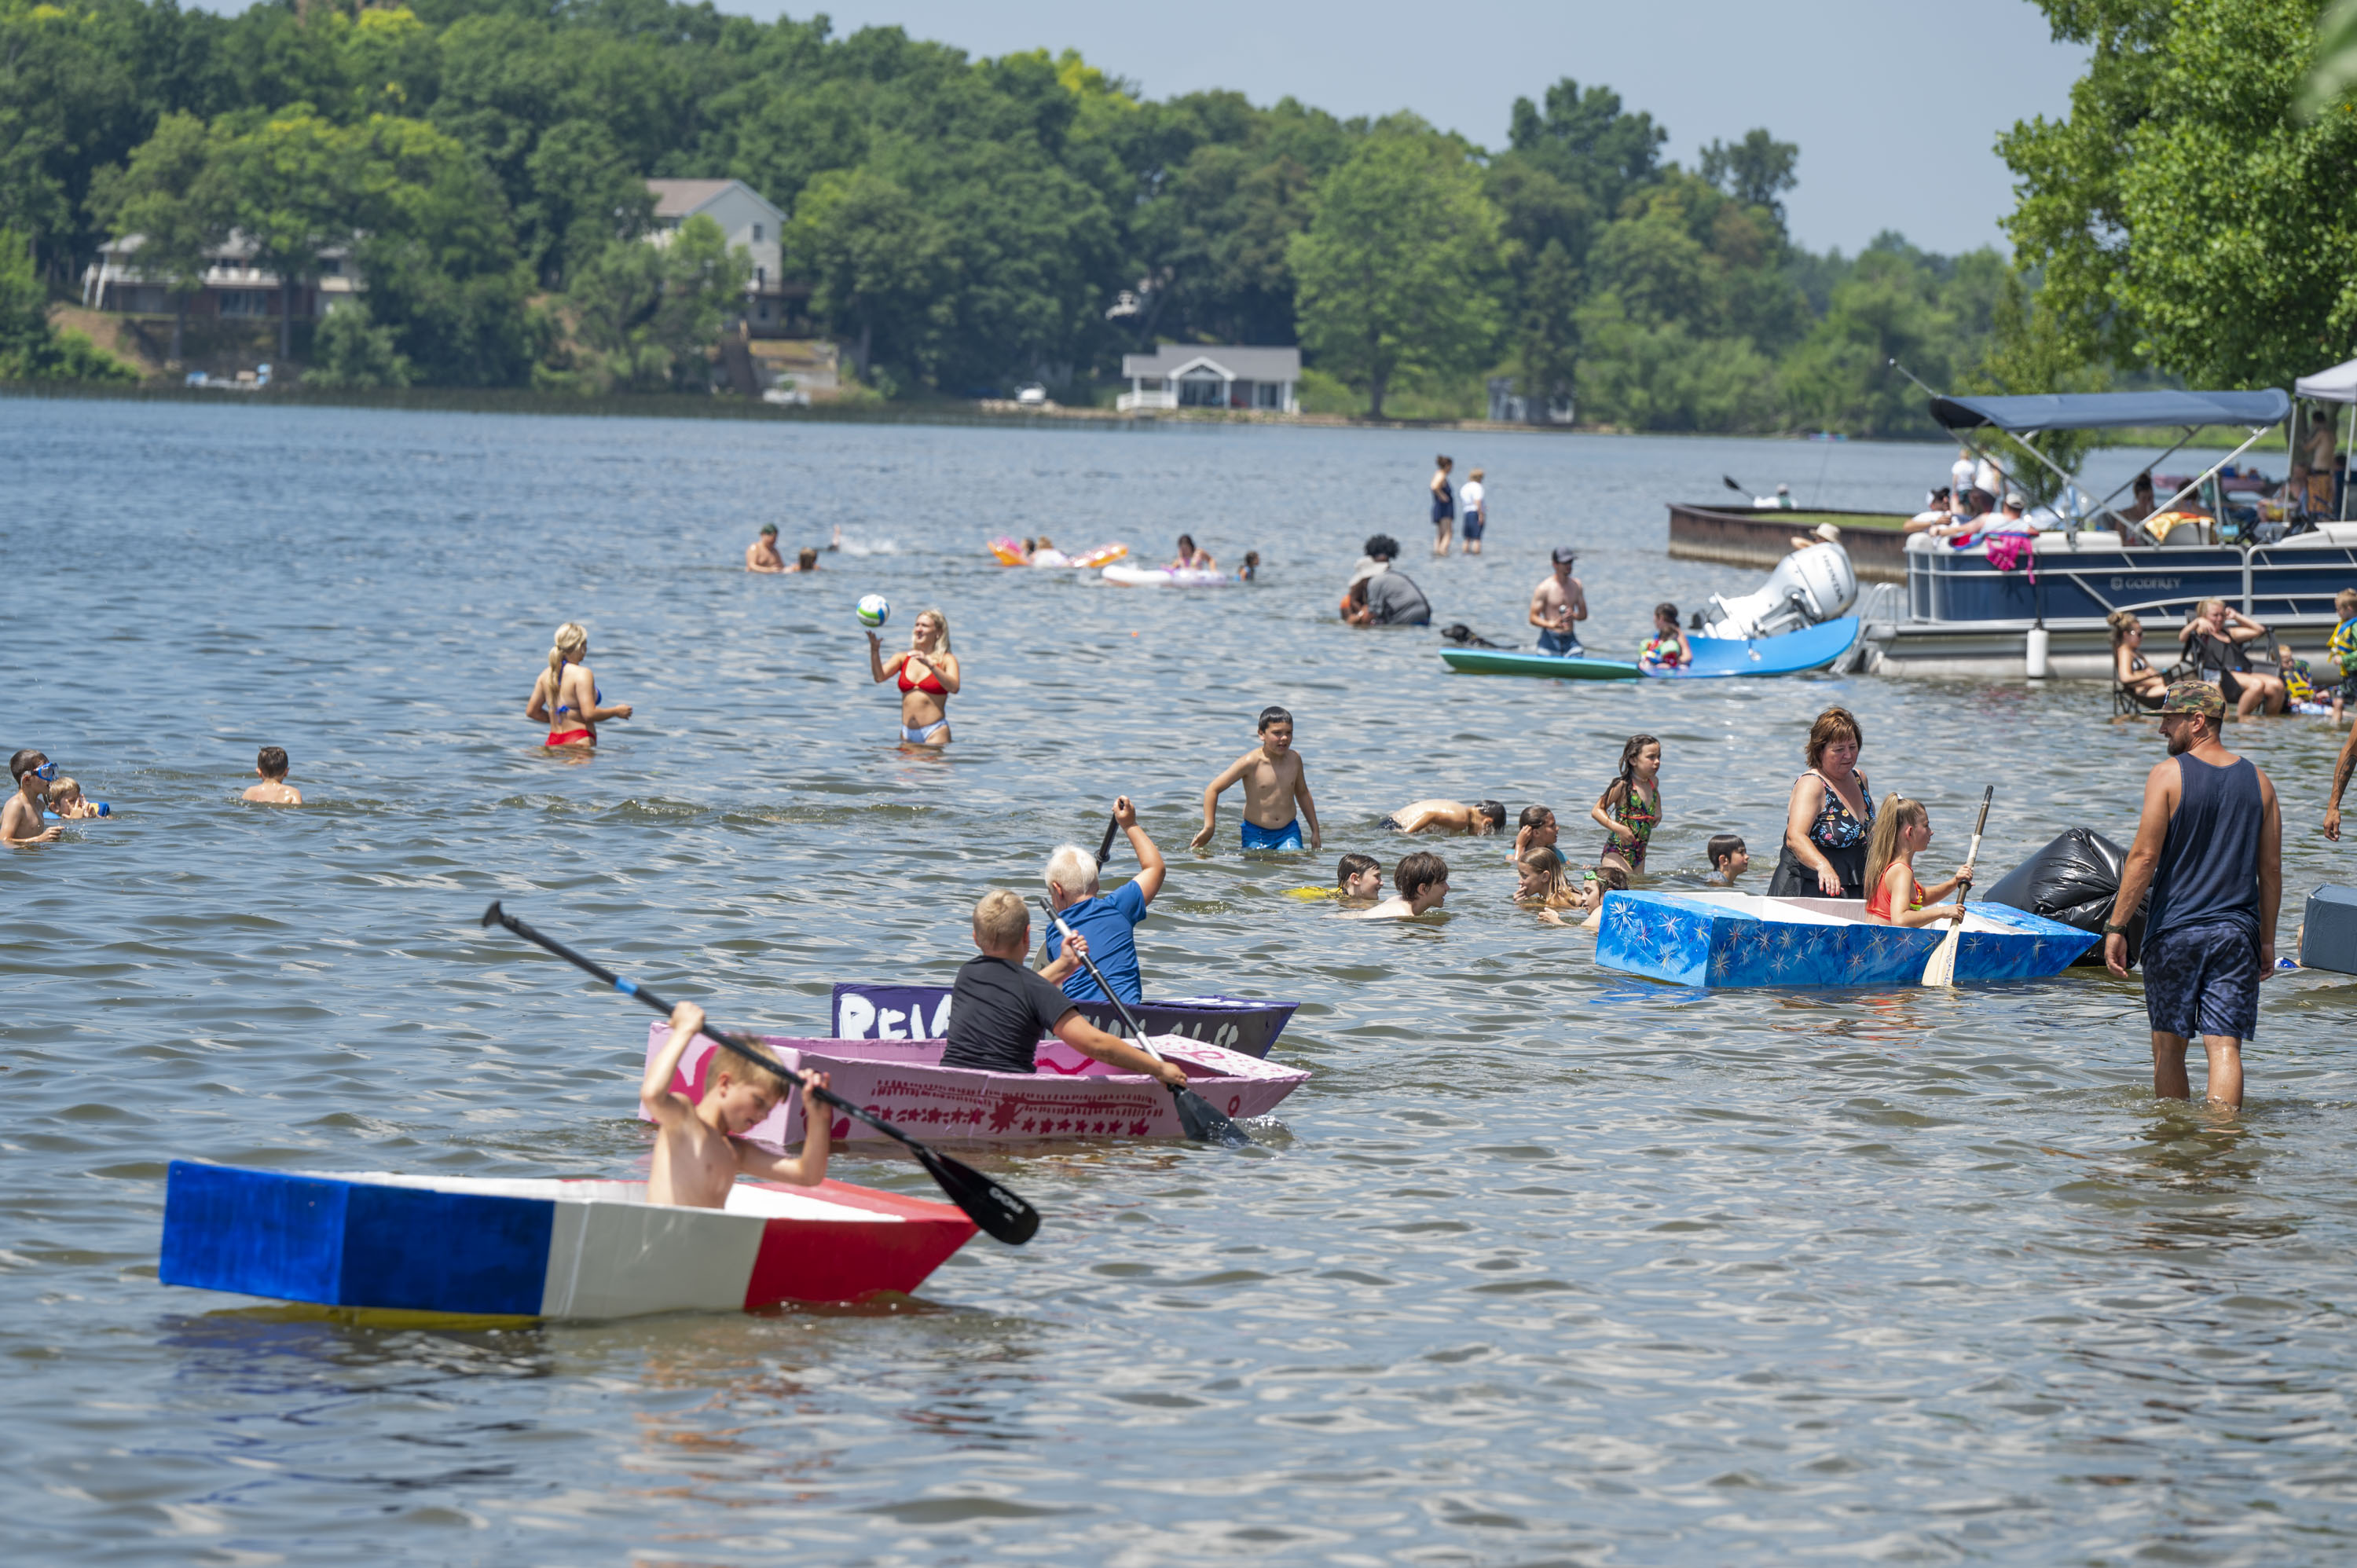 Sink or swim: Our favorite photos from the July 4th Grass Lake cardboard  boat races 